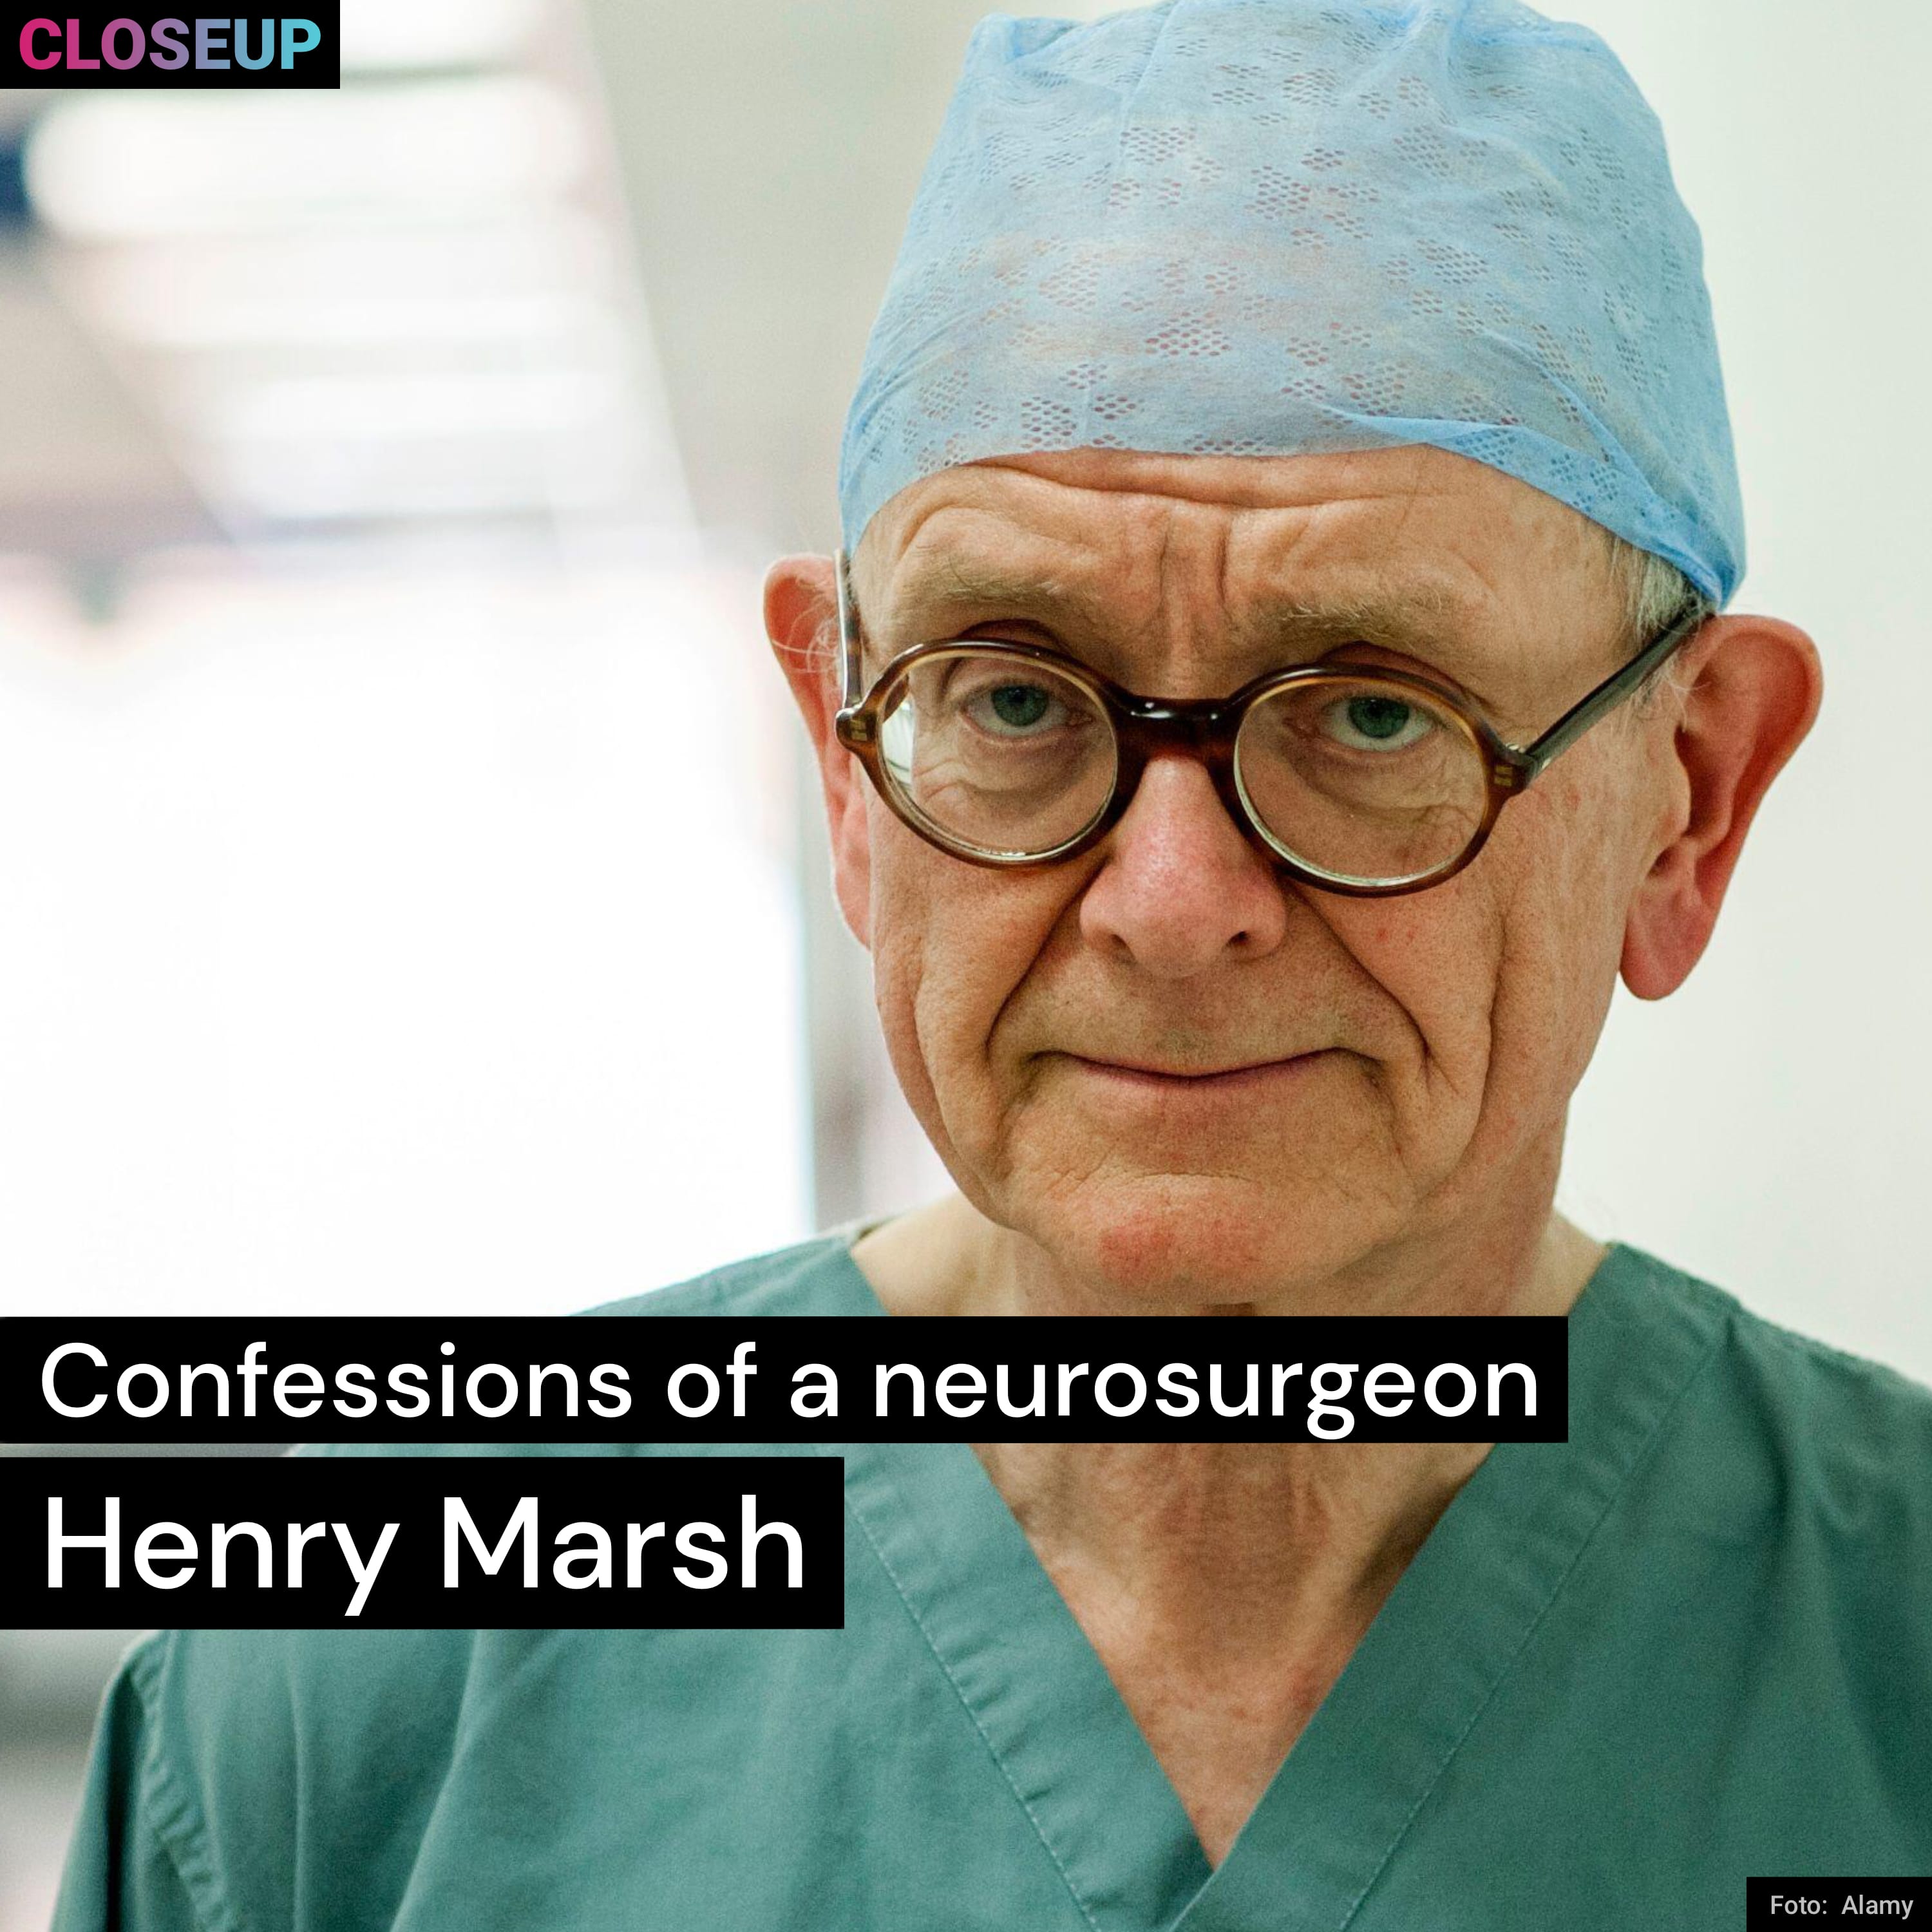 Confessions of a neurosurgeon - Henry Marsh | CloseUp